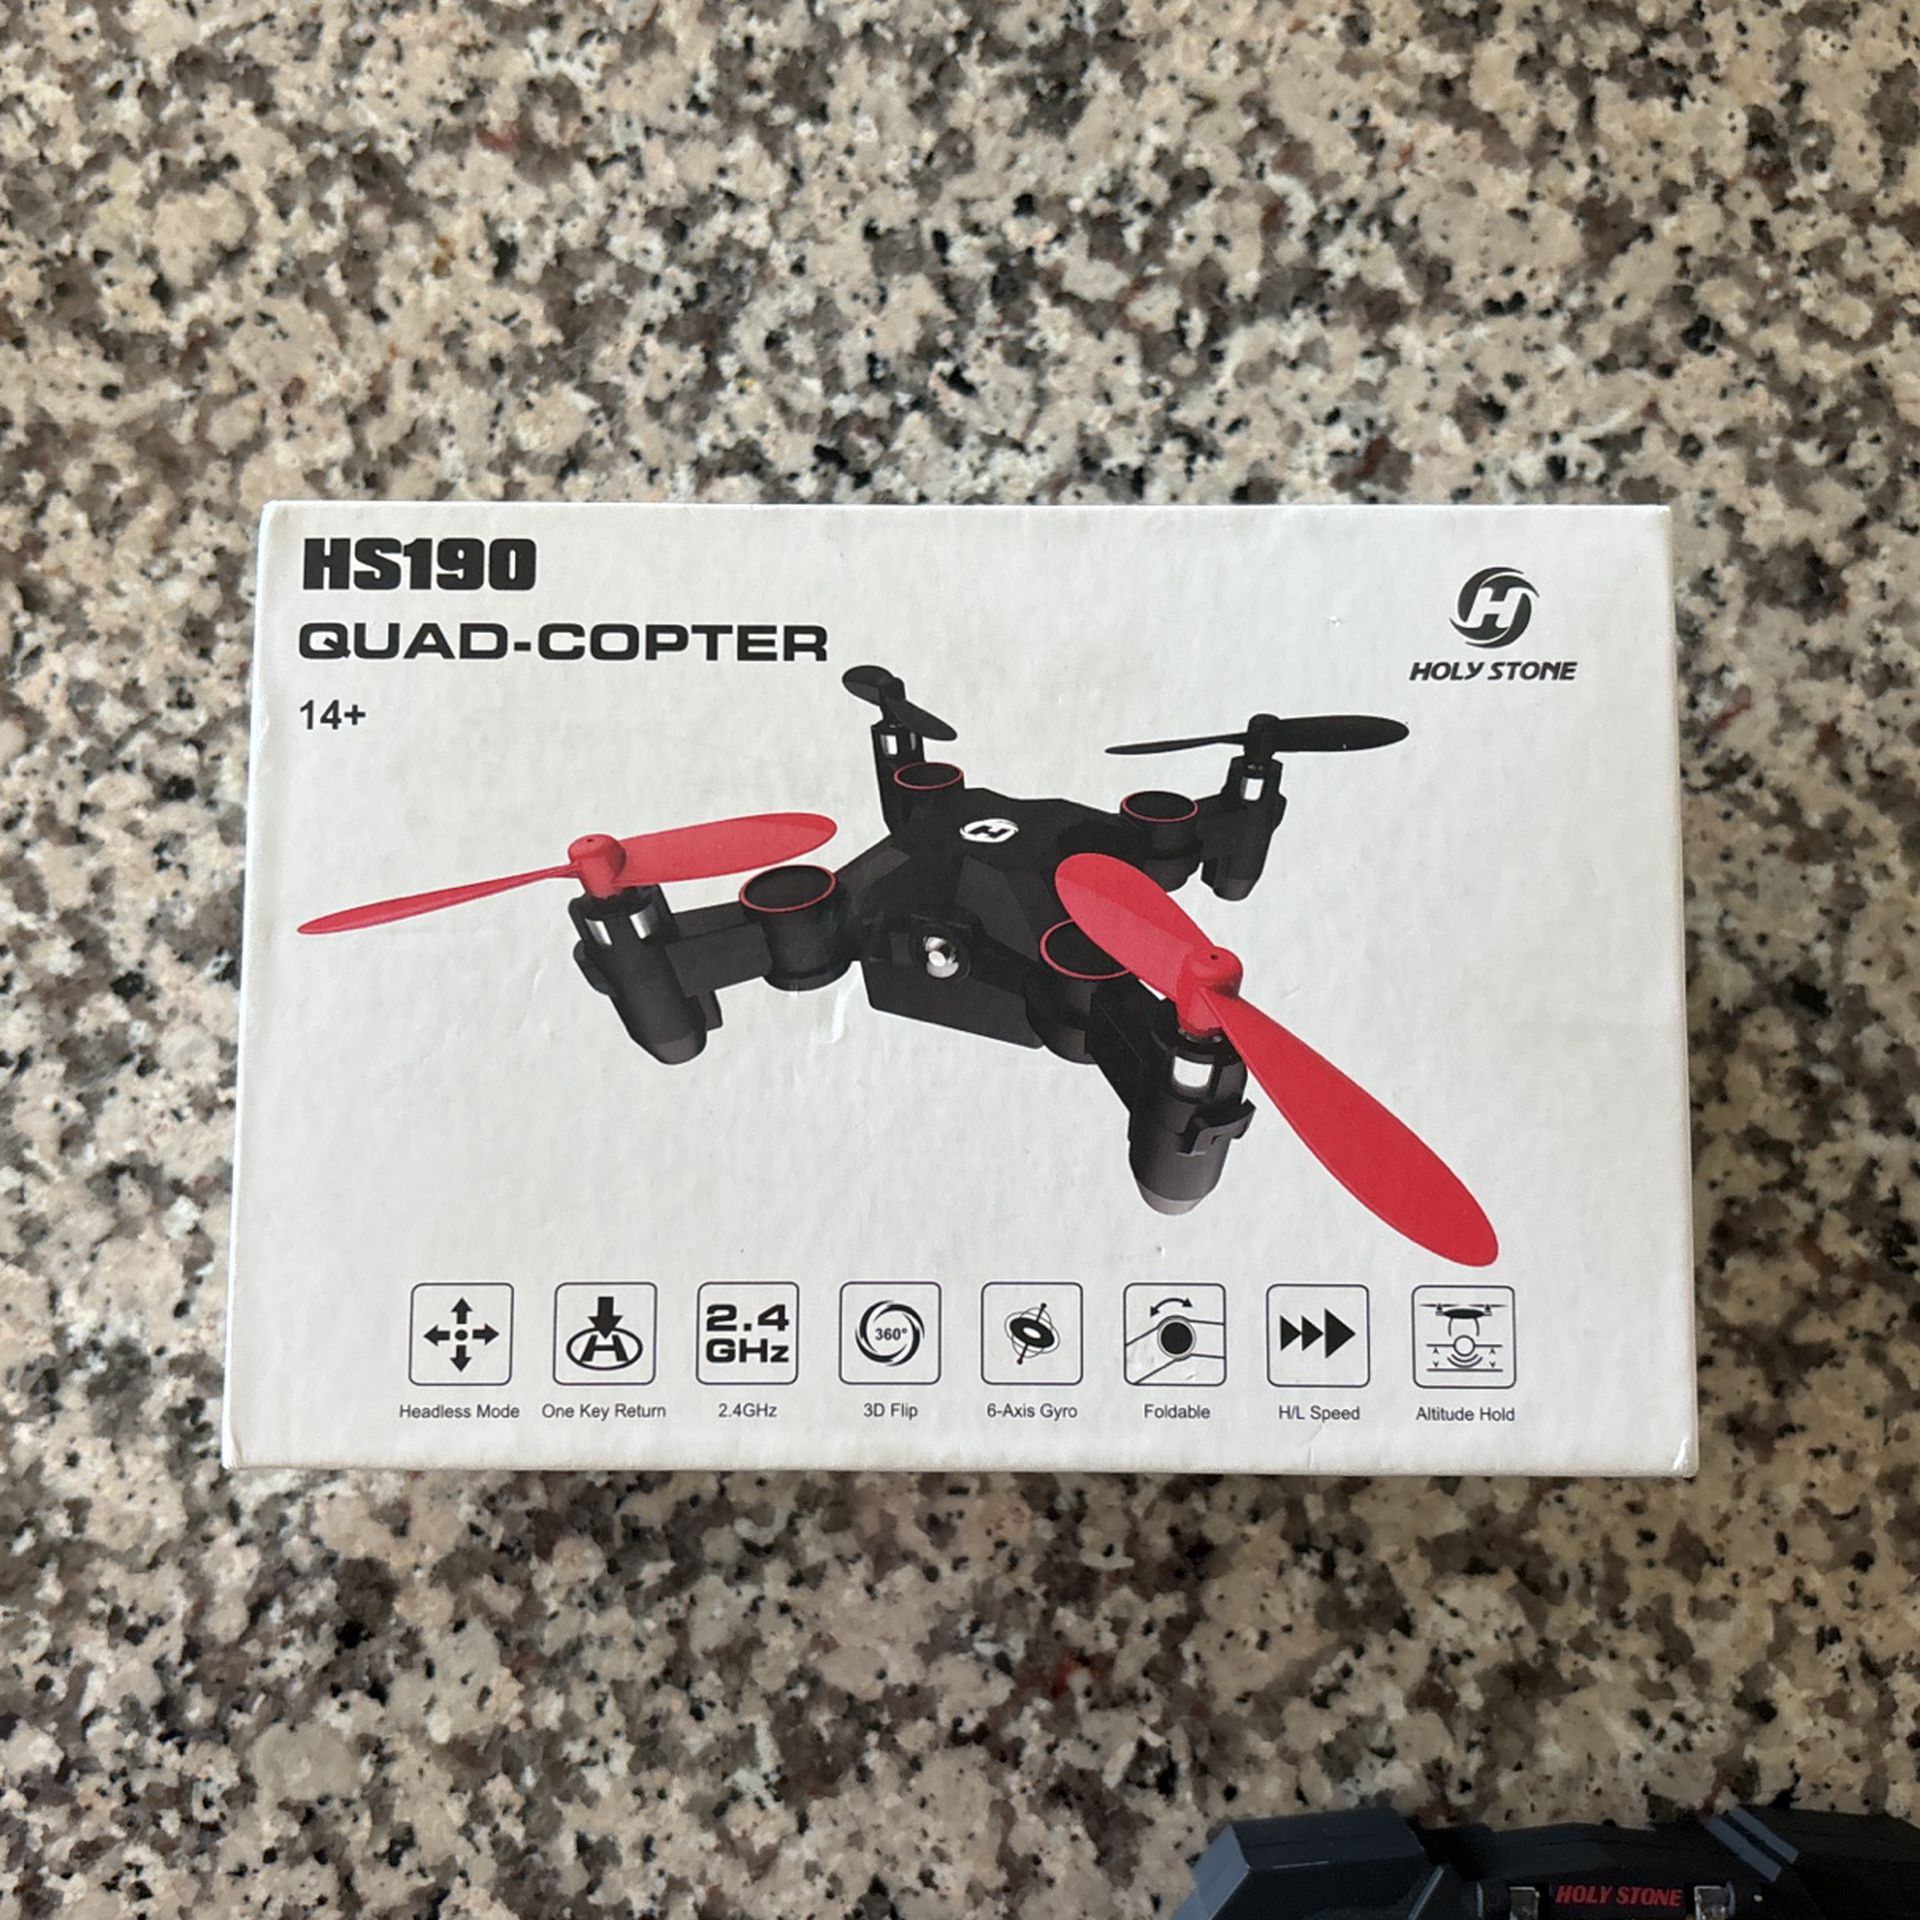 Holy Stone HS190 Quad-Copter